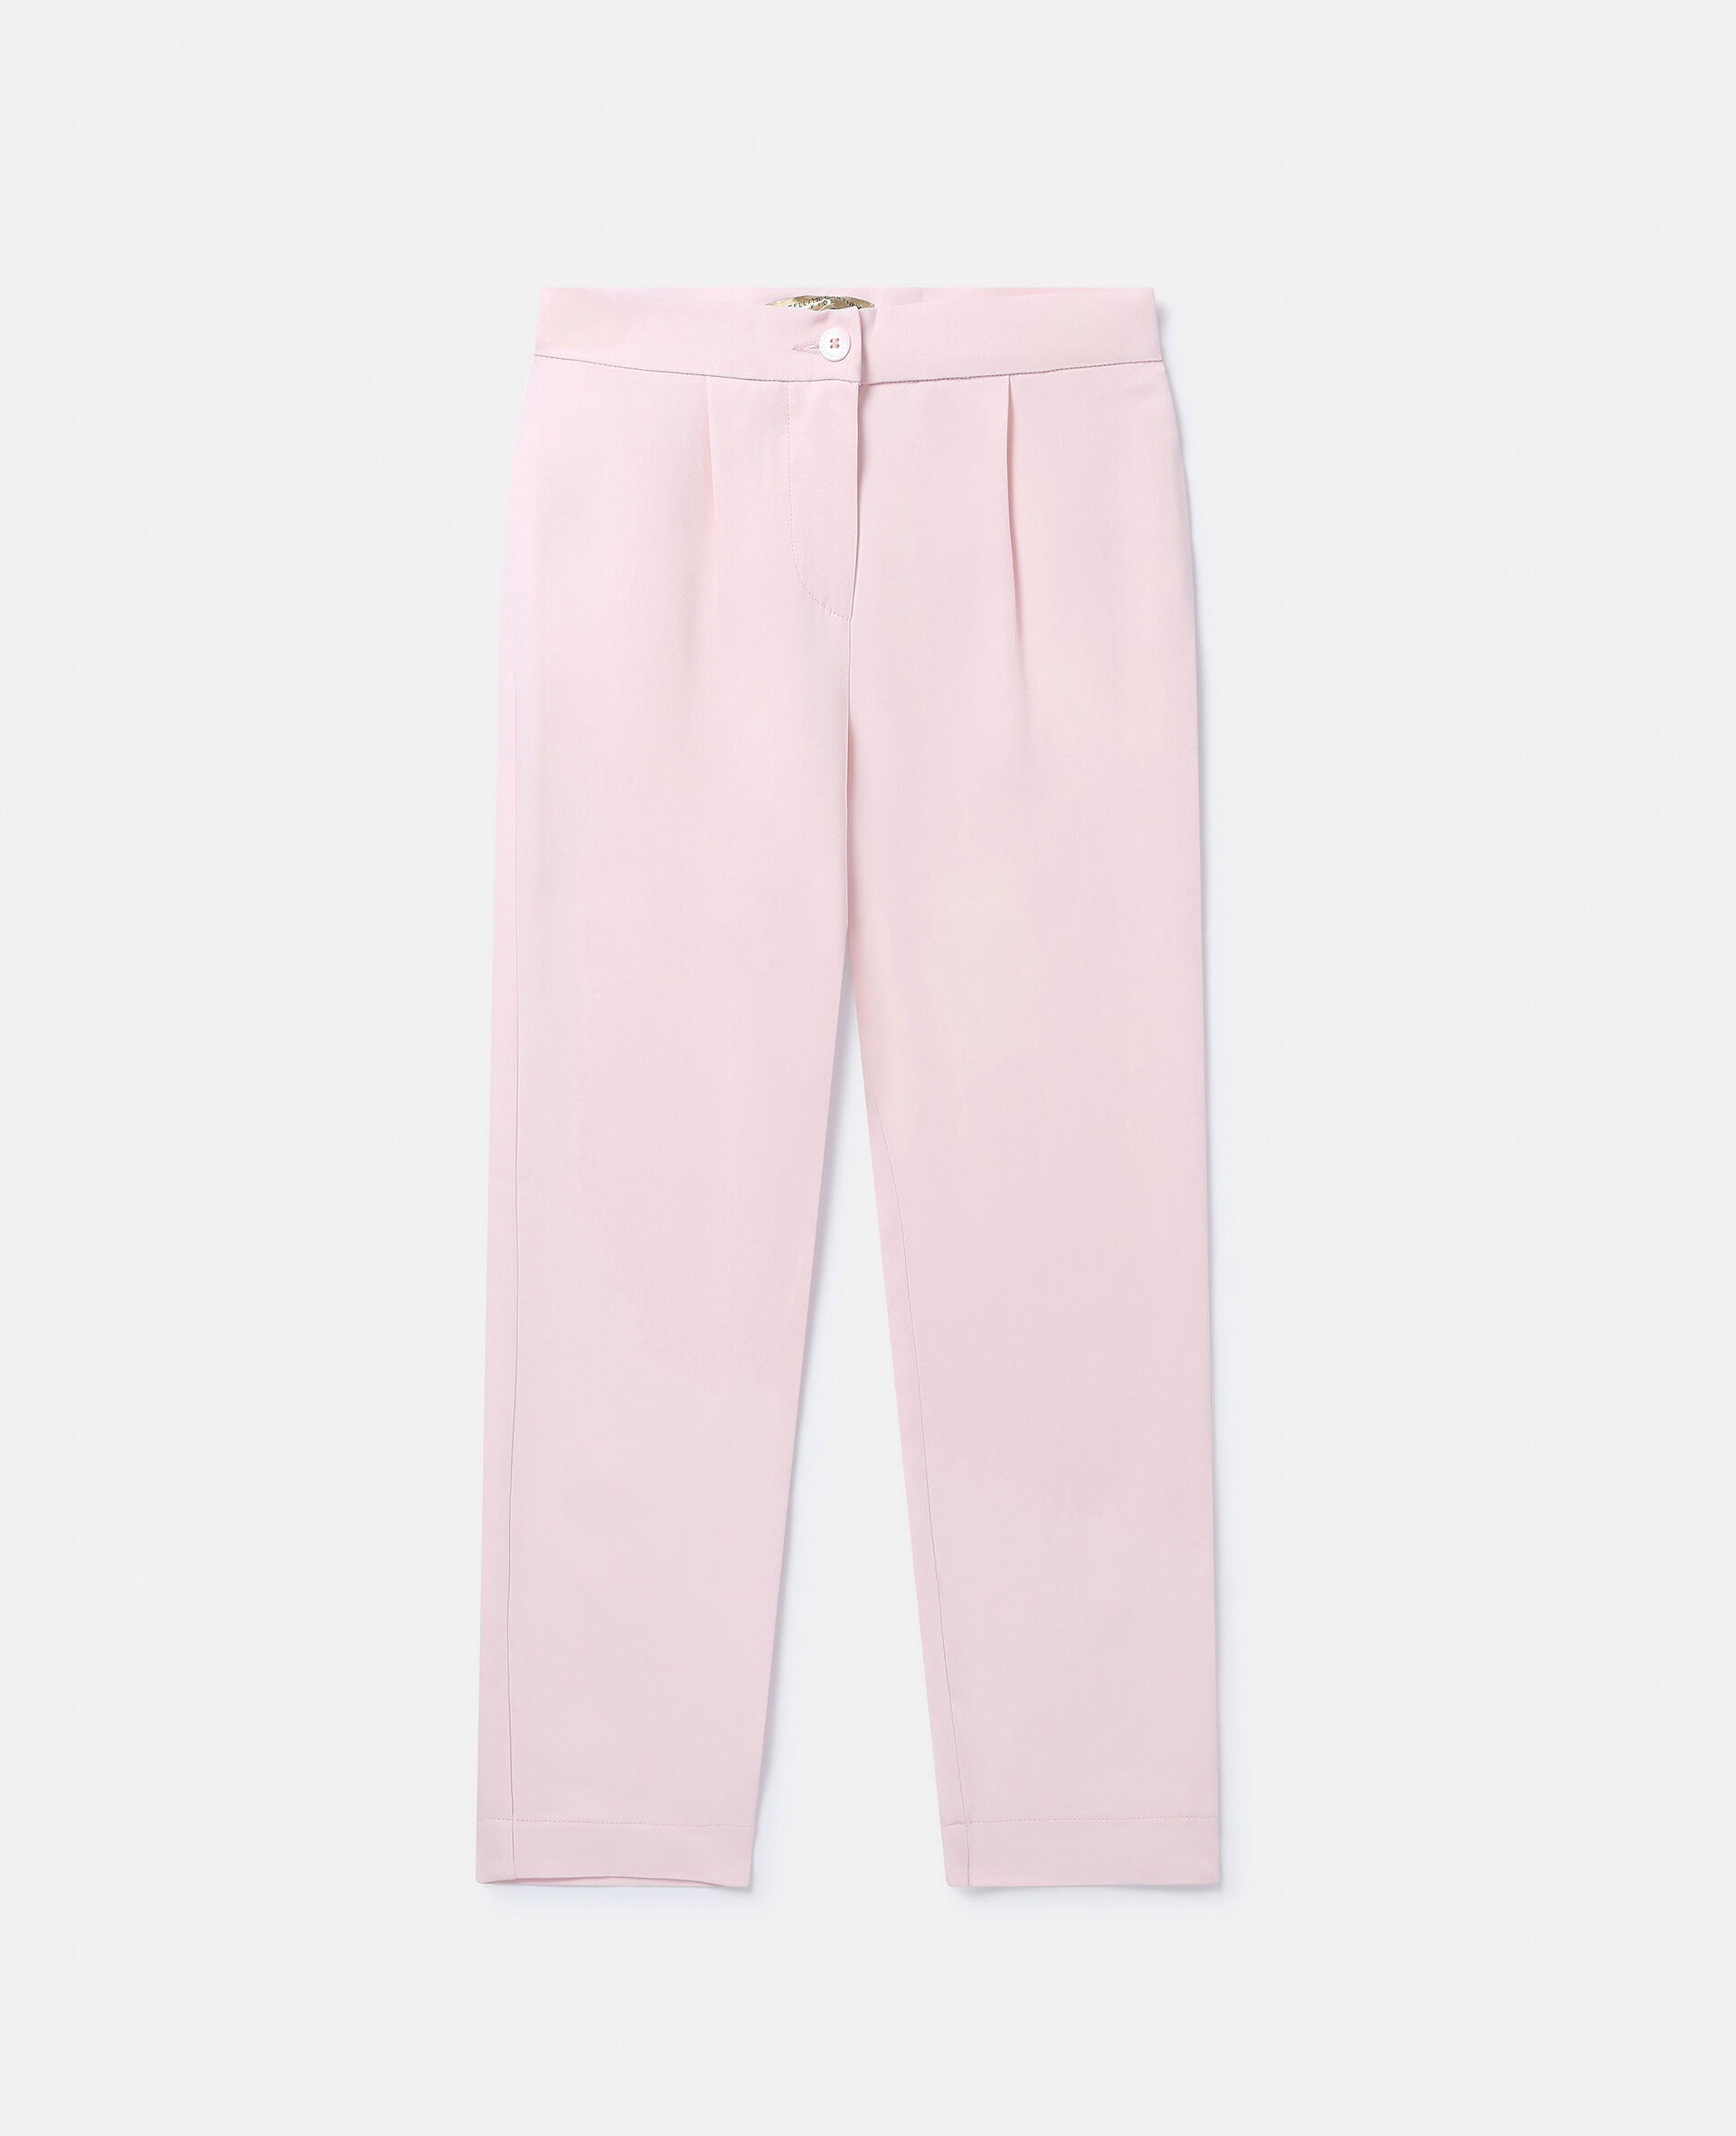 Pleat Front Tailored Trousers-Rose-large image number 0